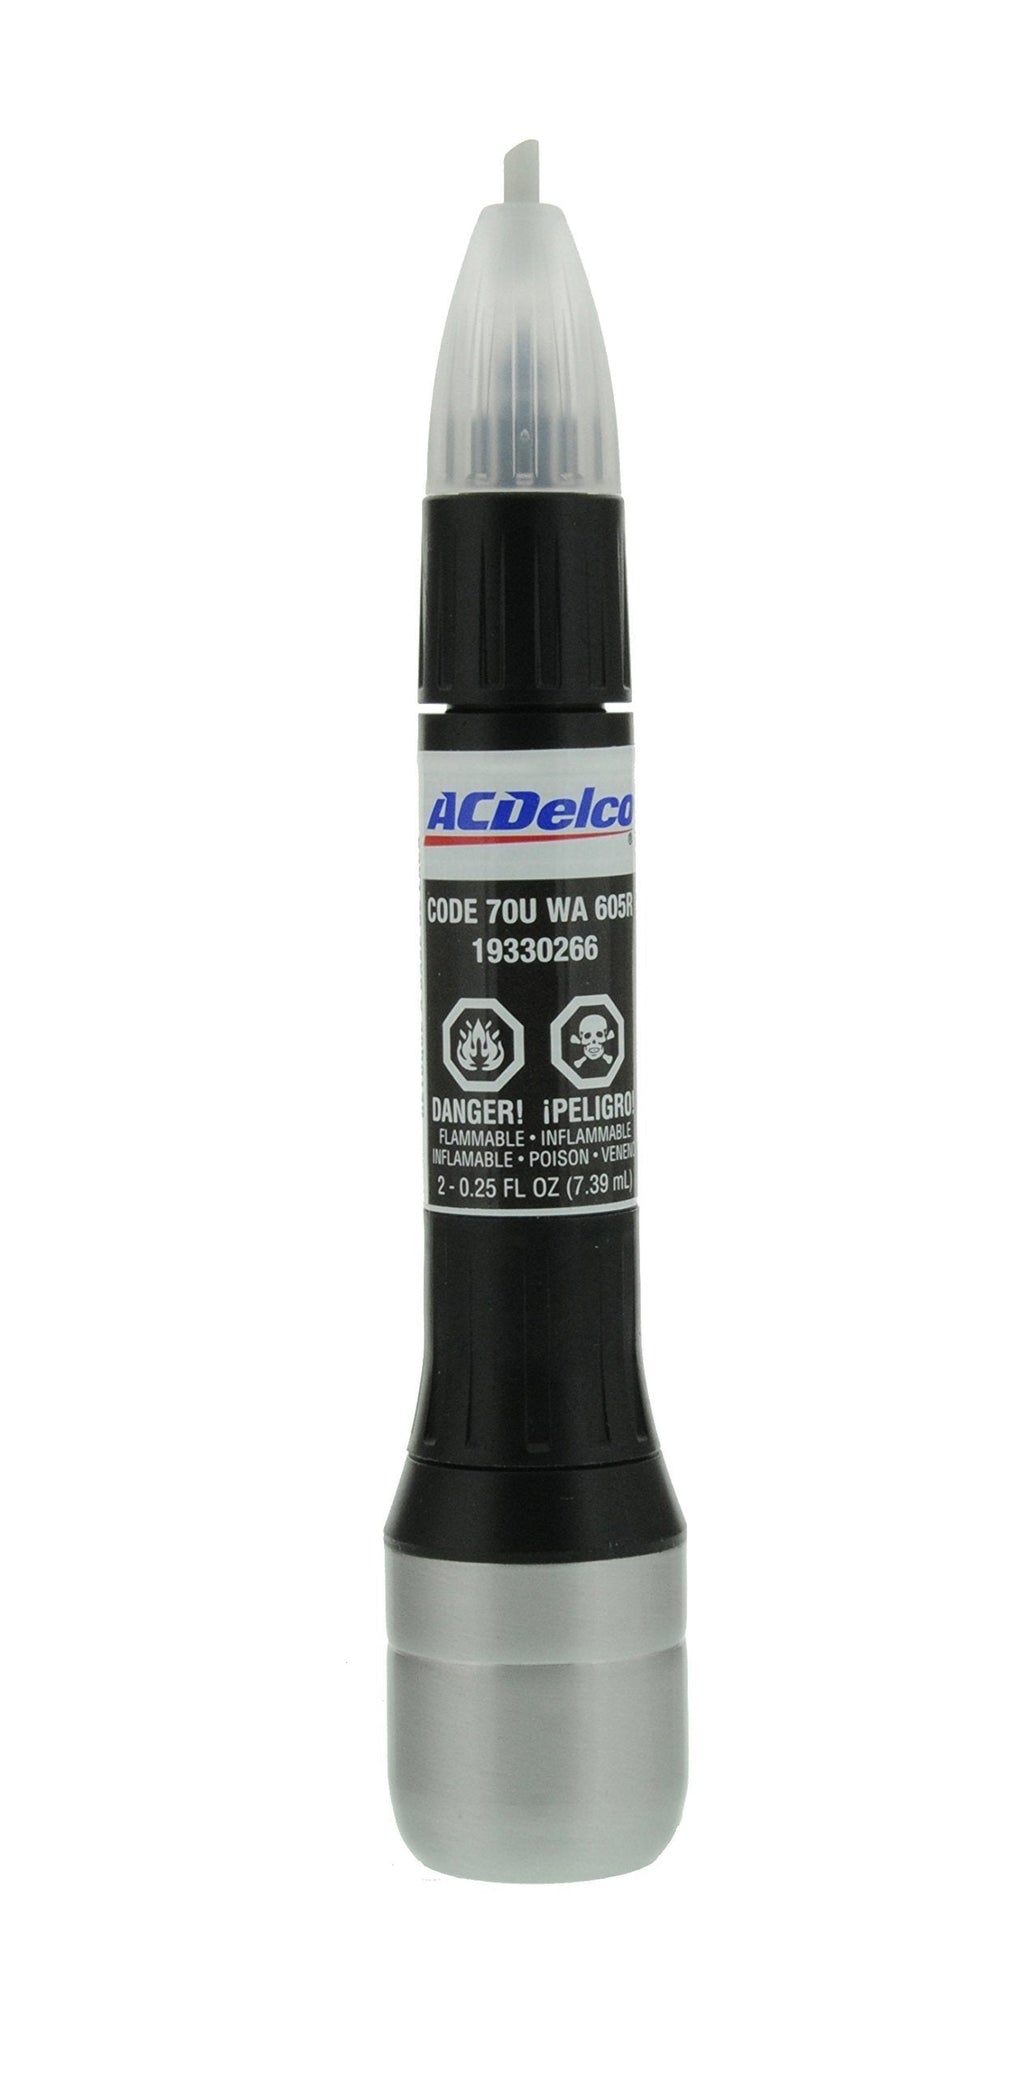  [AUSTRALIA] - ACDelco 19367956 Charcoal Gray Metallic (WA605R) Four-In-One Touch-Up Paint - .5 oz Pen